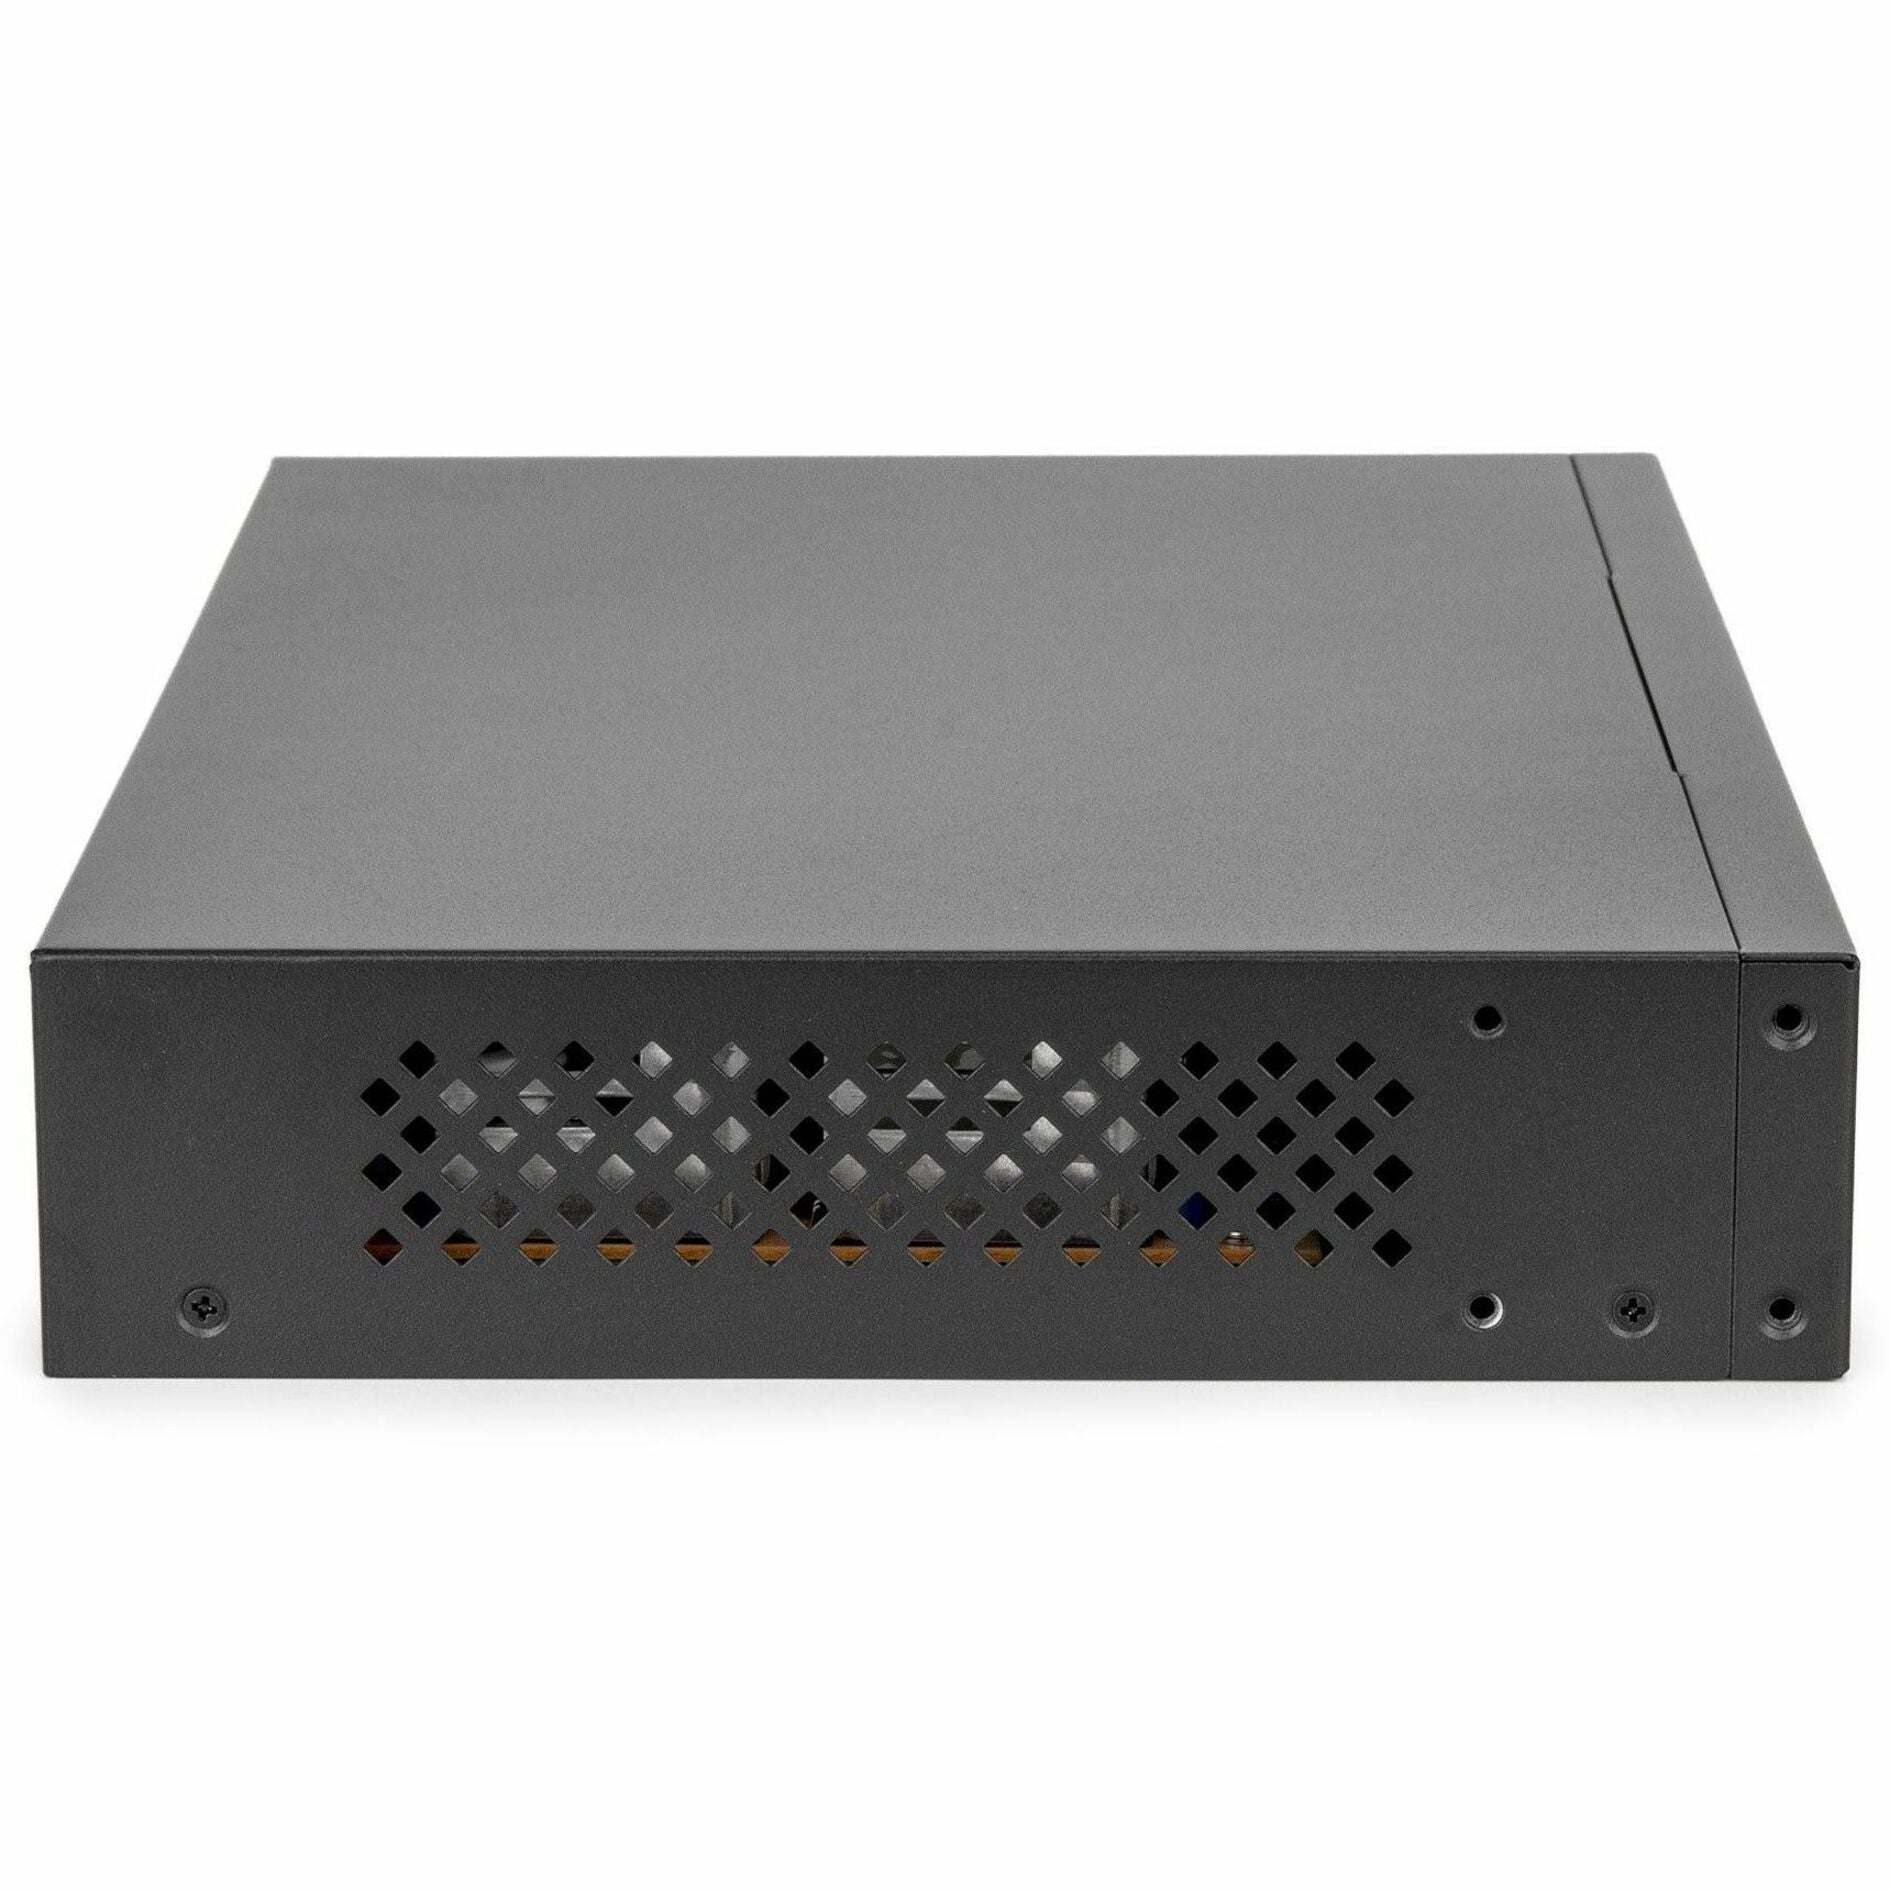 Rocstor Y10S009-B1 SolidConnect SCM8 8-Port PoE+ Gigabit Managed Switch with 2 SFP Ports, Industrial Network Government